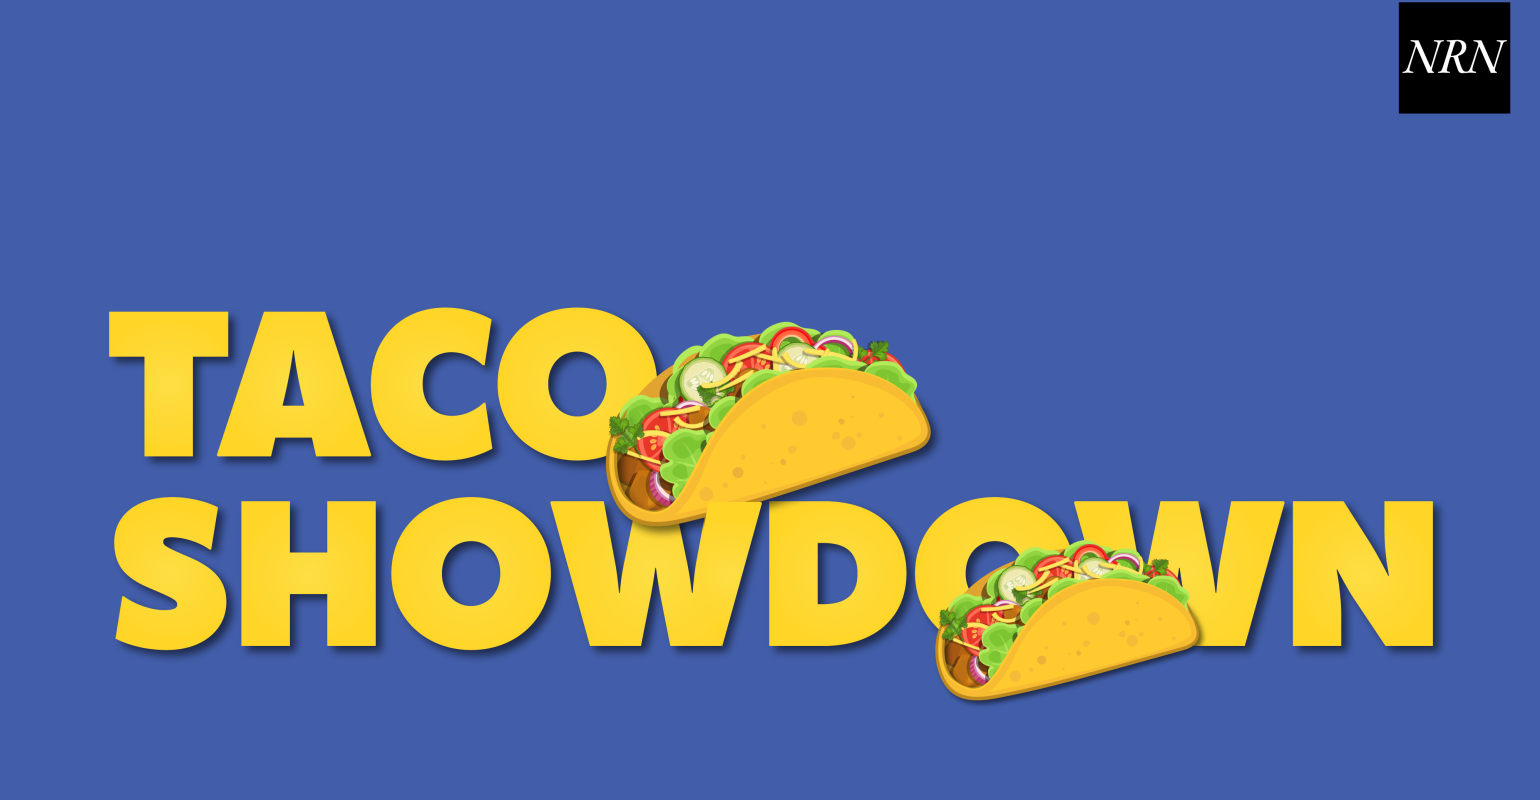 Meet the restaurant players in the Taco Showdown Nation's Restaurant News